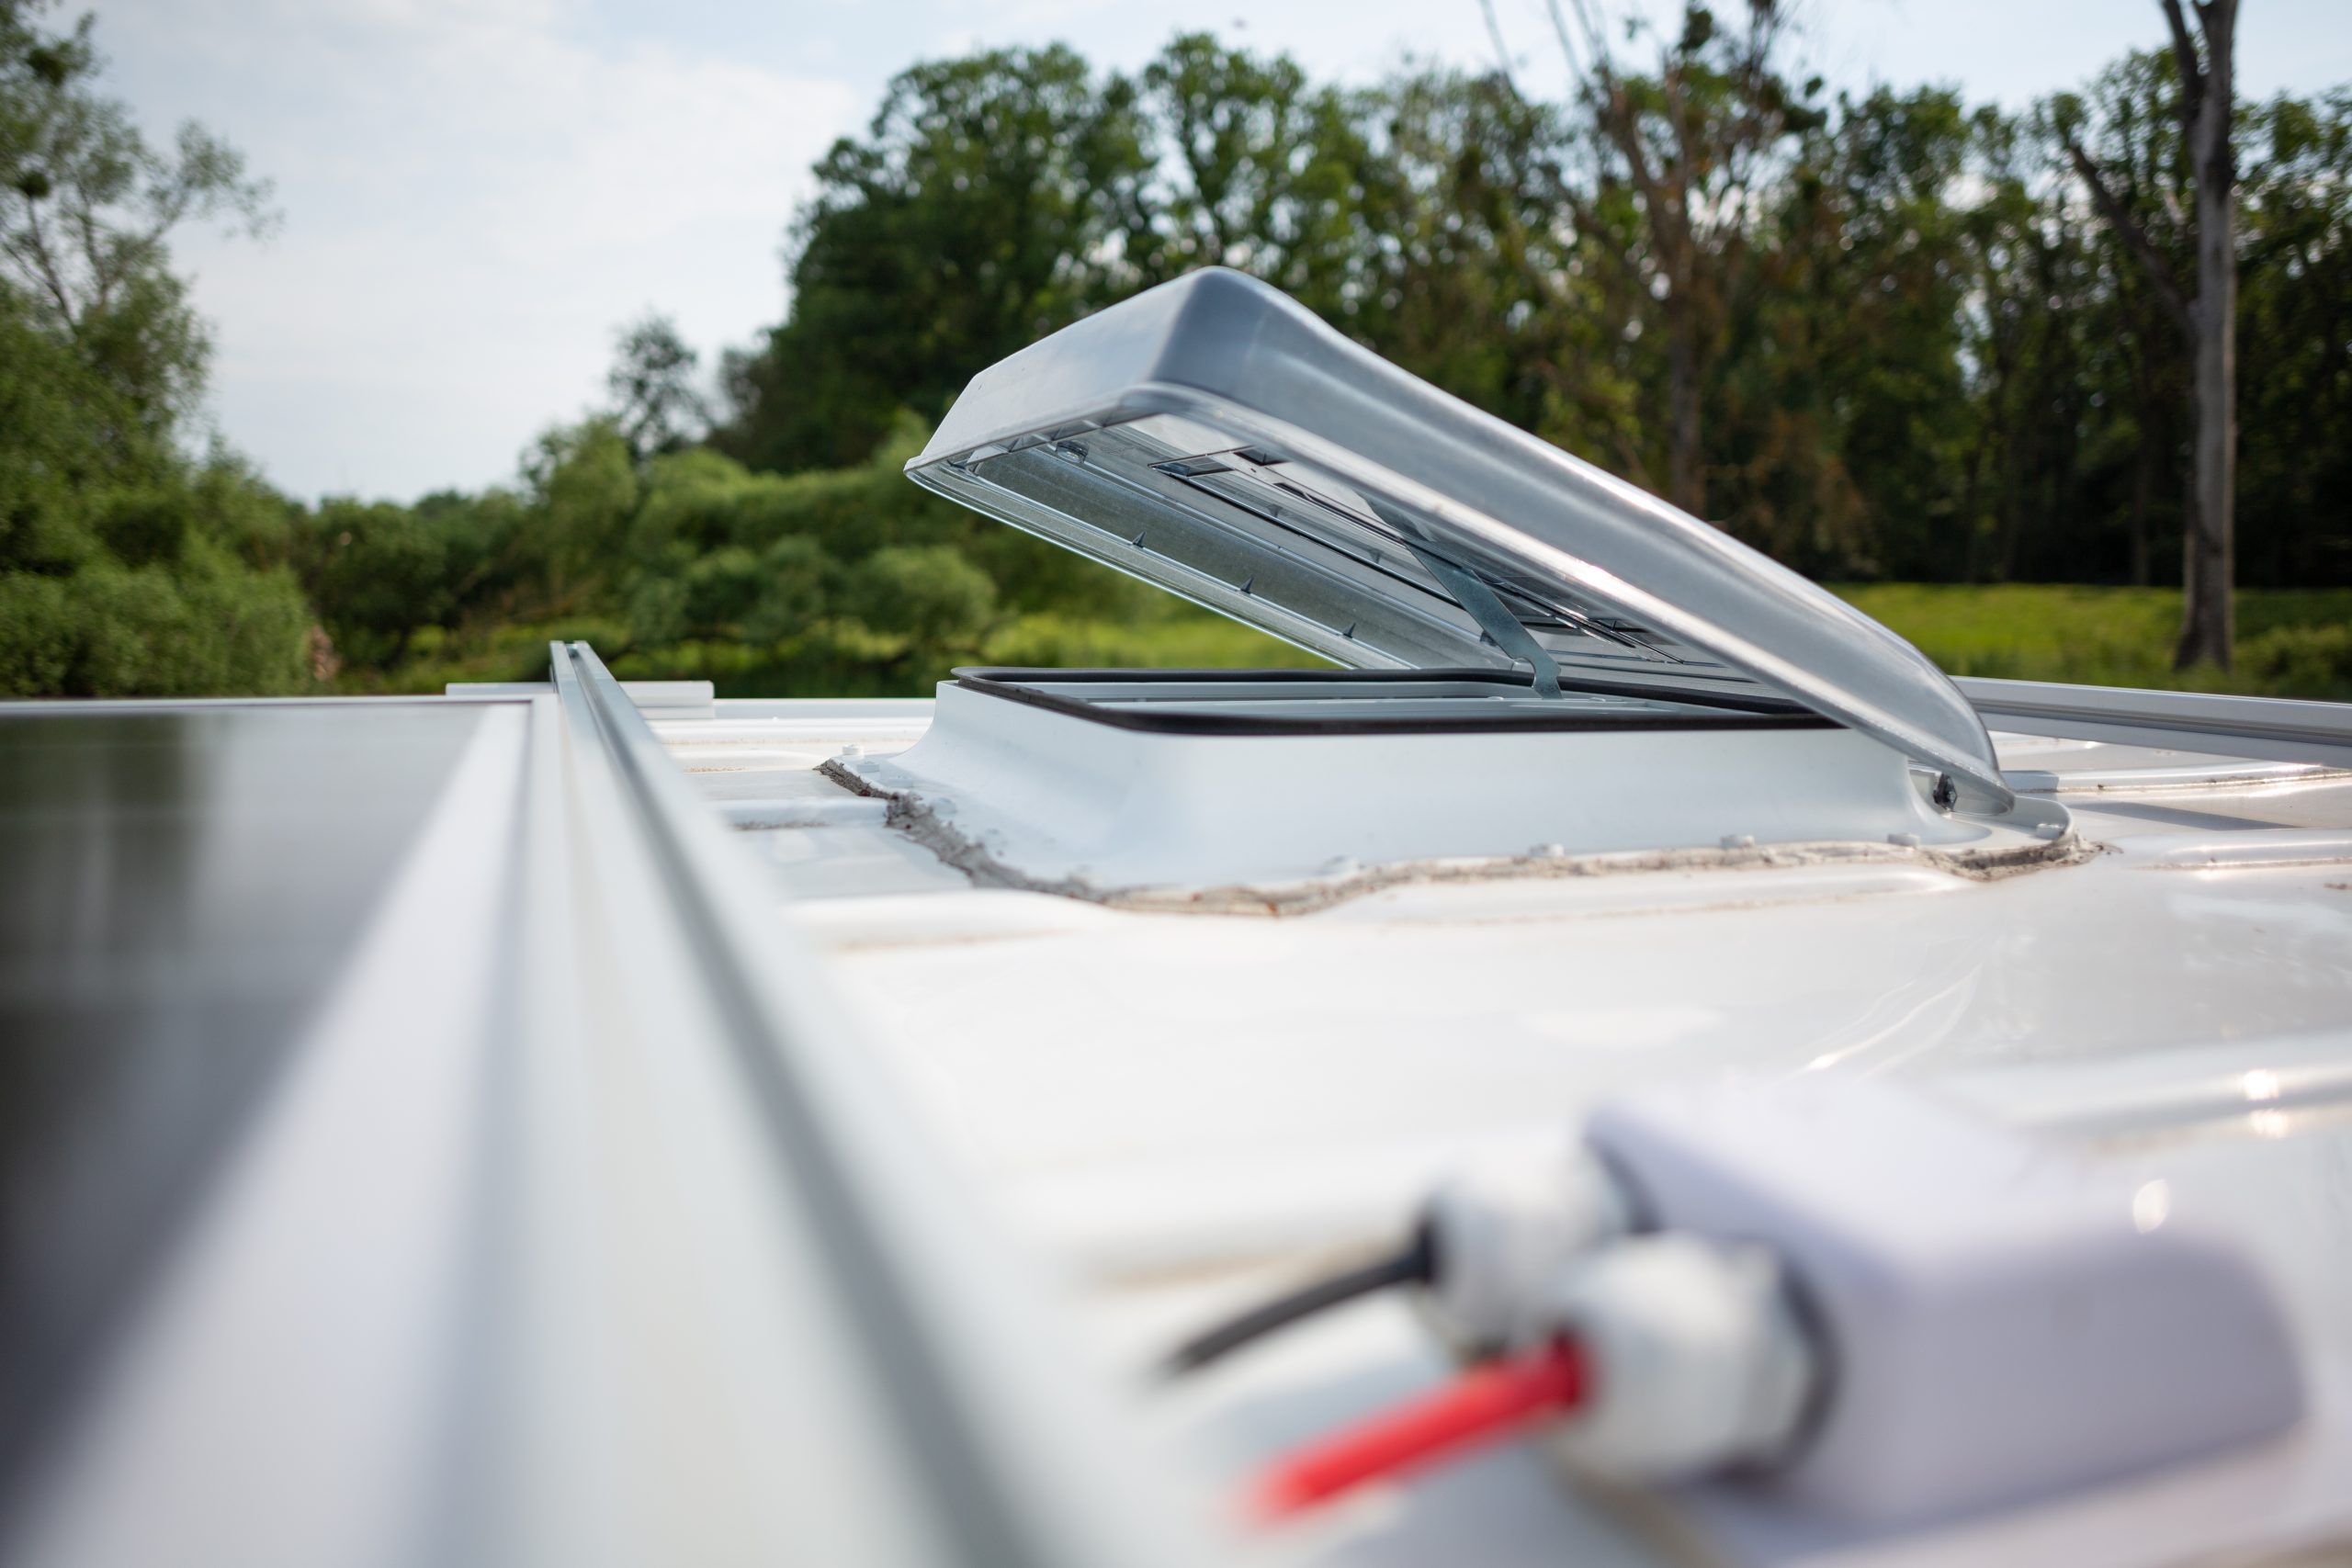 View of RV rubber roof with open vent cover